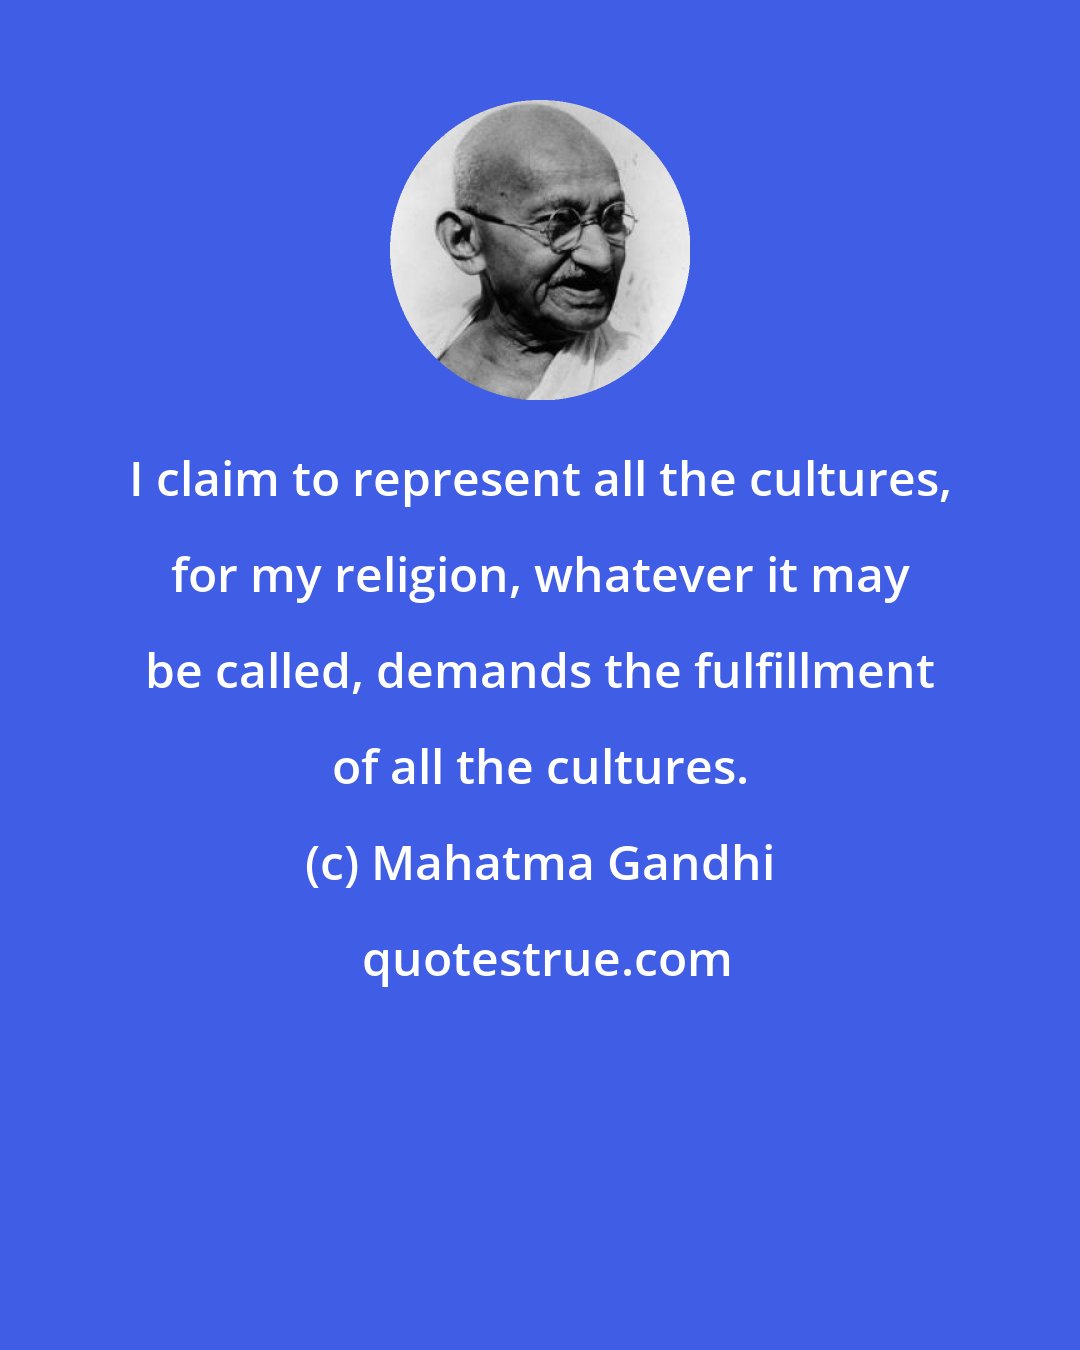 Mahatma Gandhi: I claim to represent all the cultures, for my religion, whatever it may be called, demands the fulfillment of all the cultures.